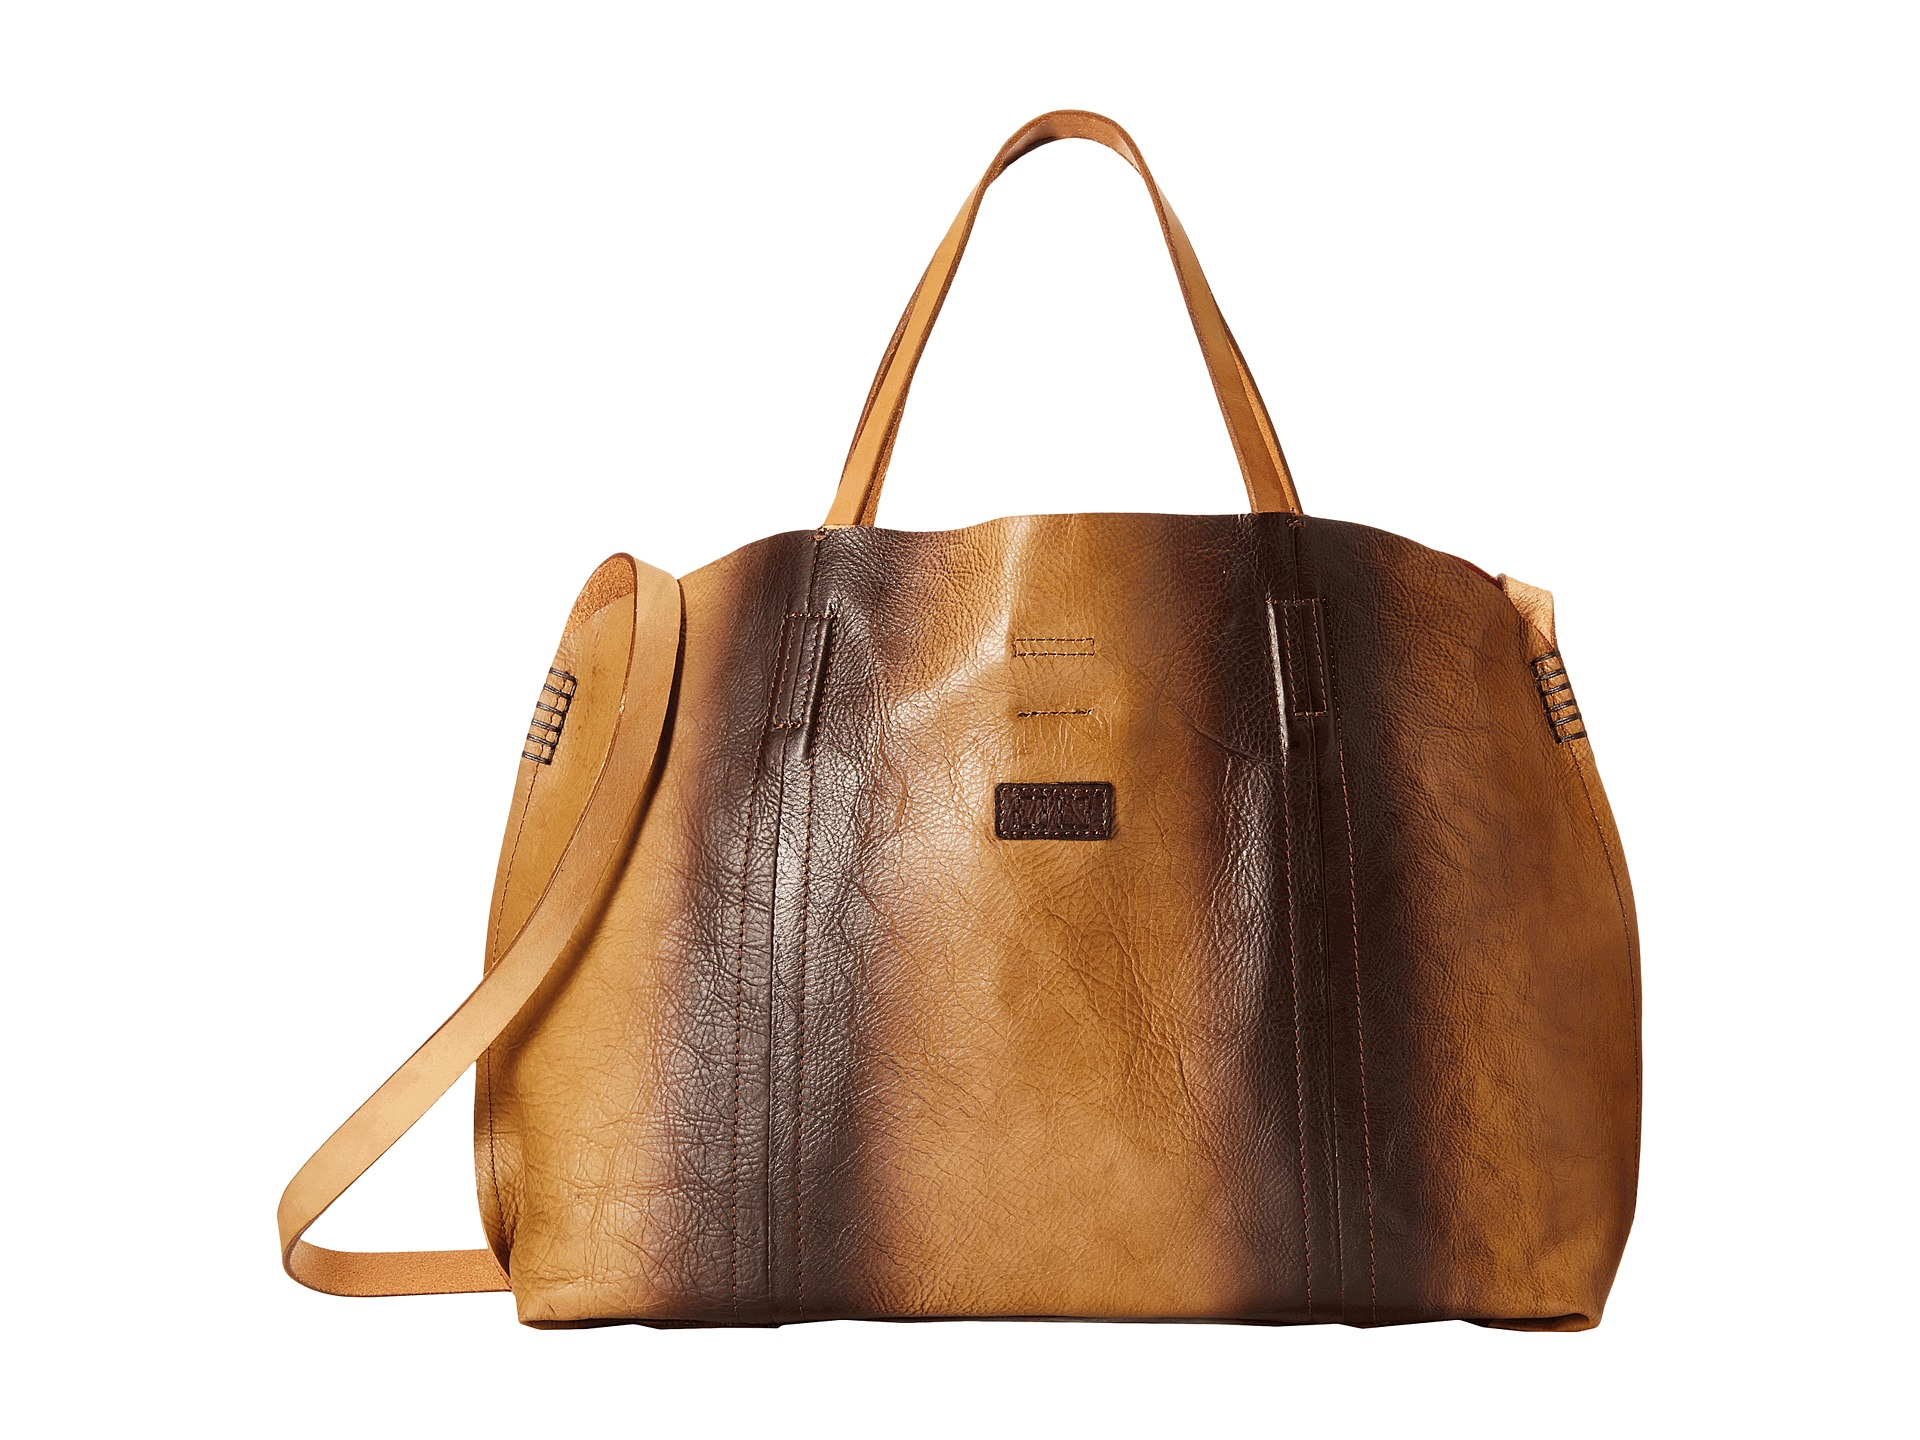 Bed Stu Leather Del Ray Bag in Tan (Brown) - Lyst